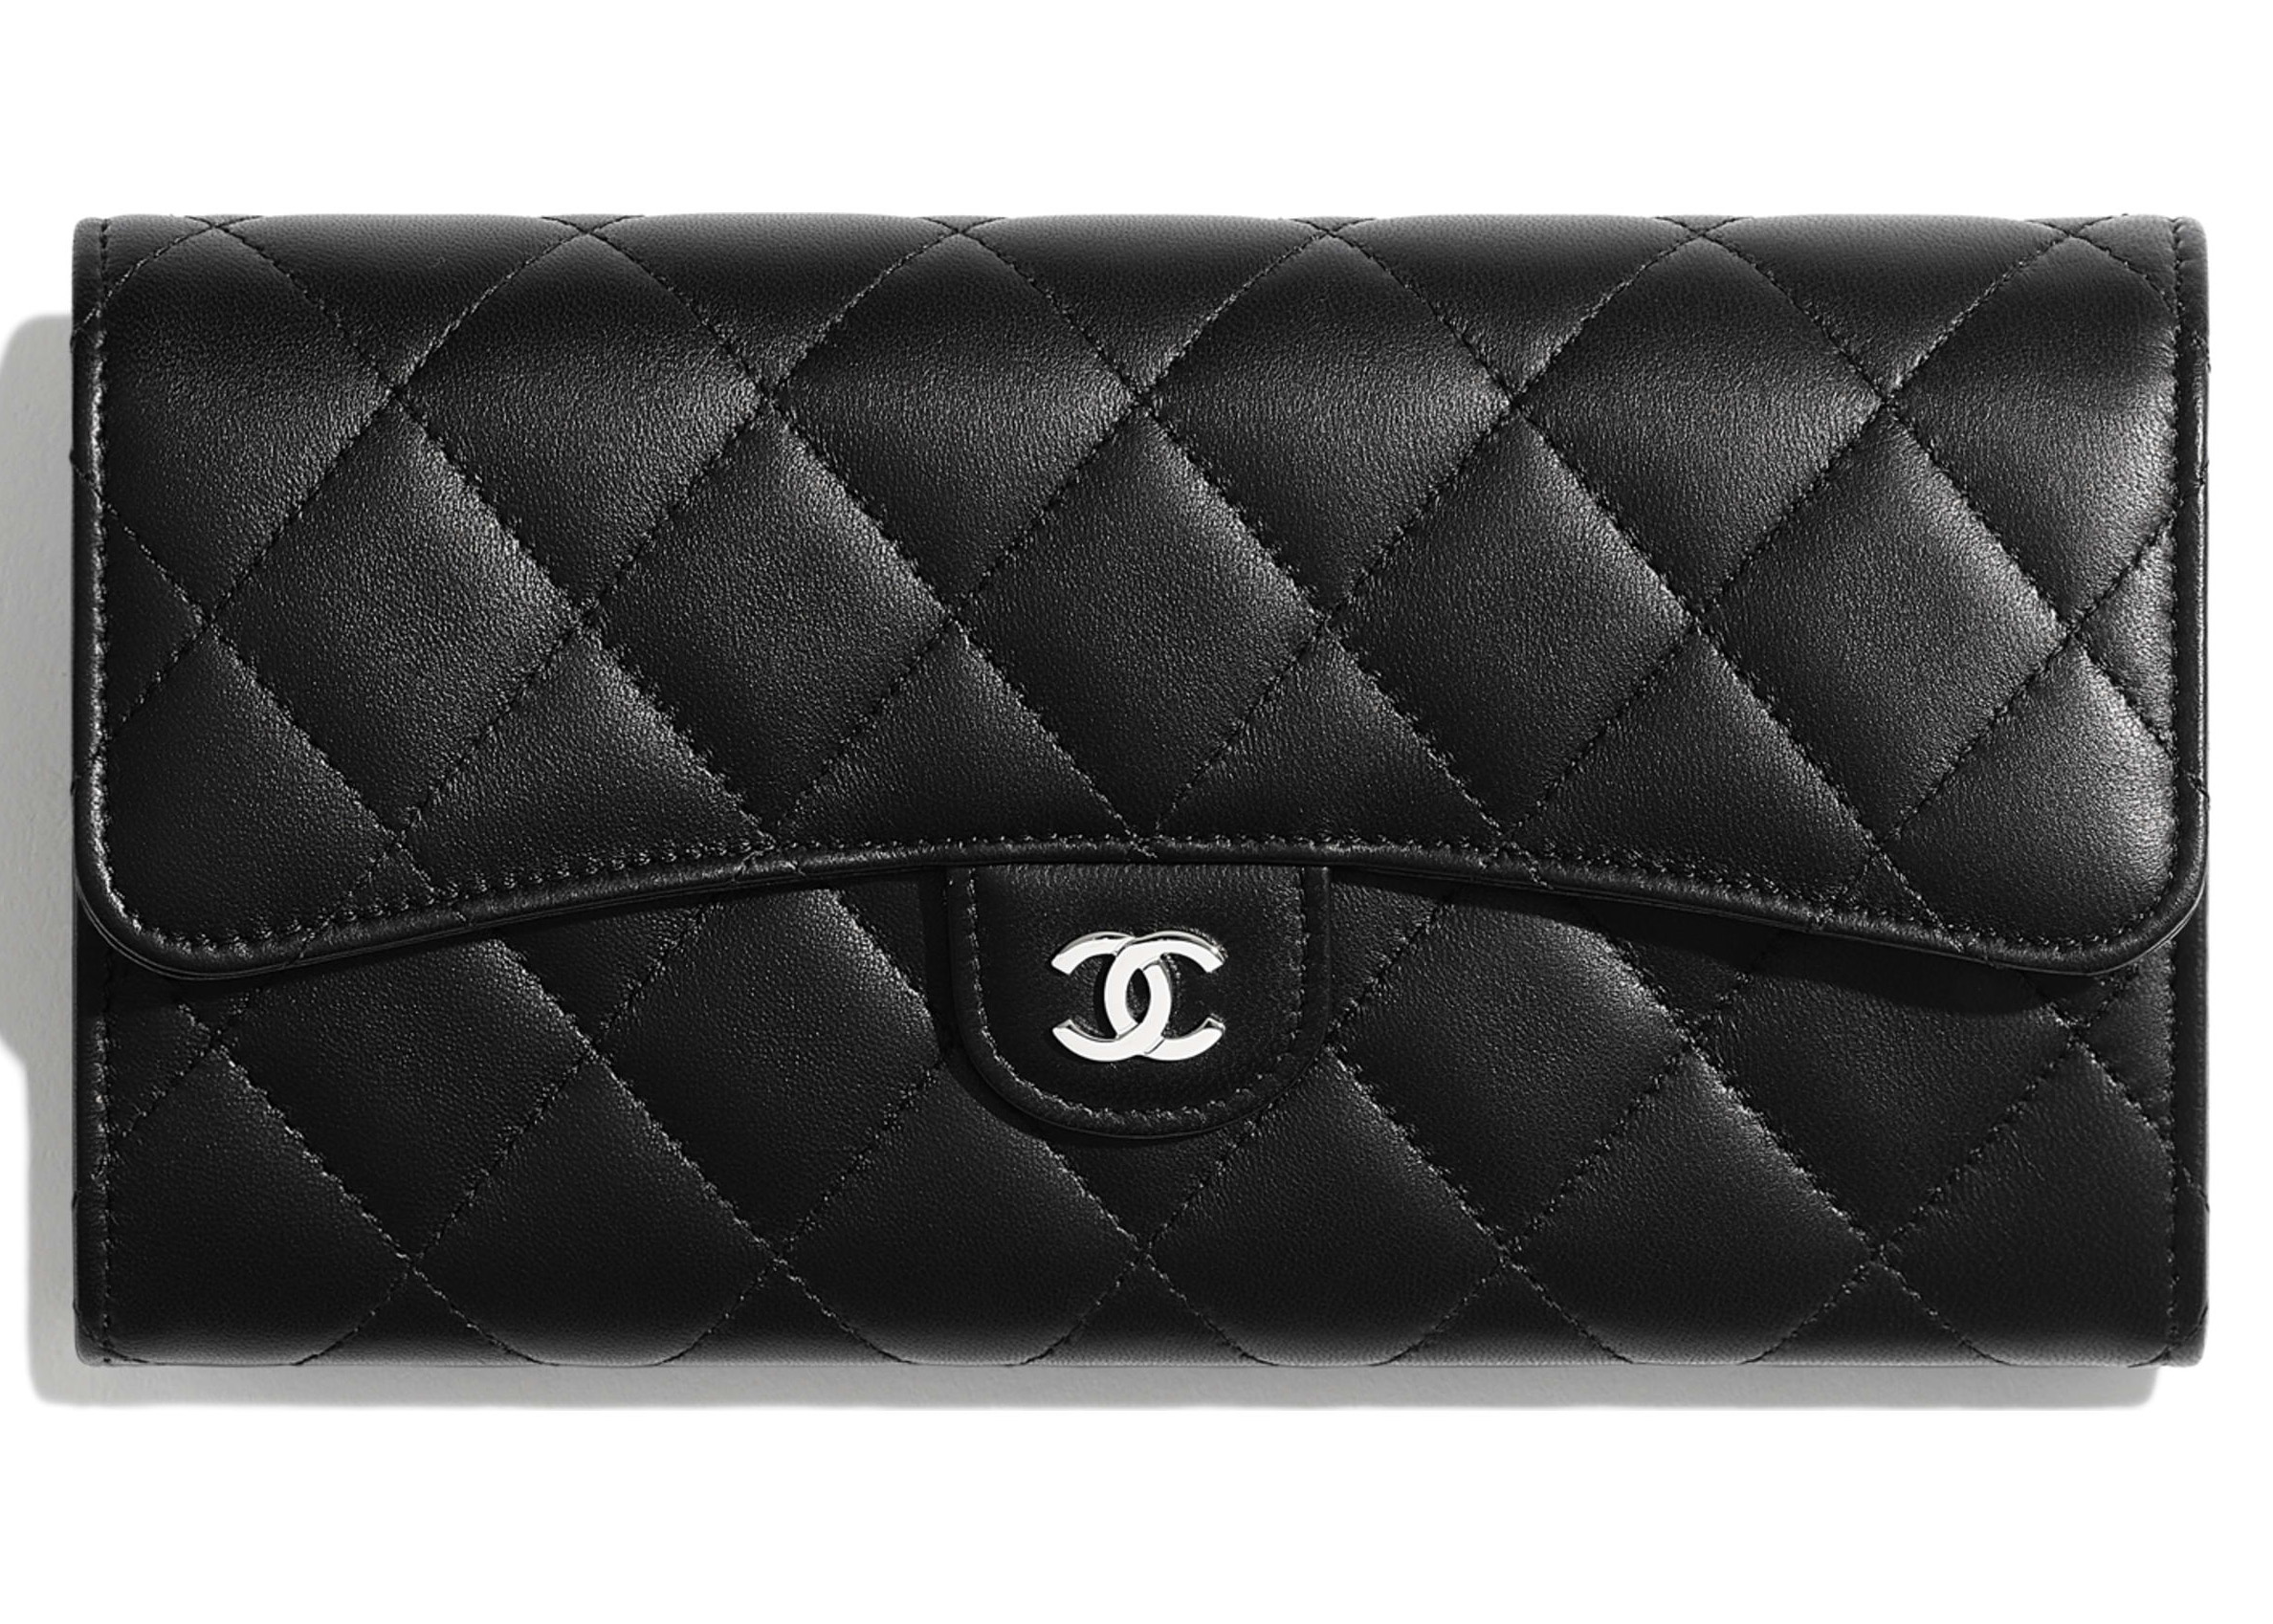 Check Out 70 Chanel Spring 2018 Wallets iPad Cases WOCs and Accessories  and Prices in Boutiques Now  PurseBlog